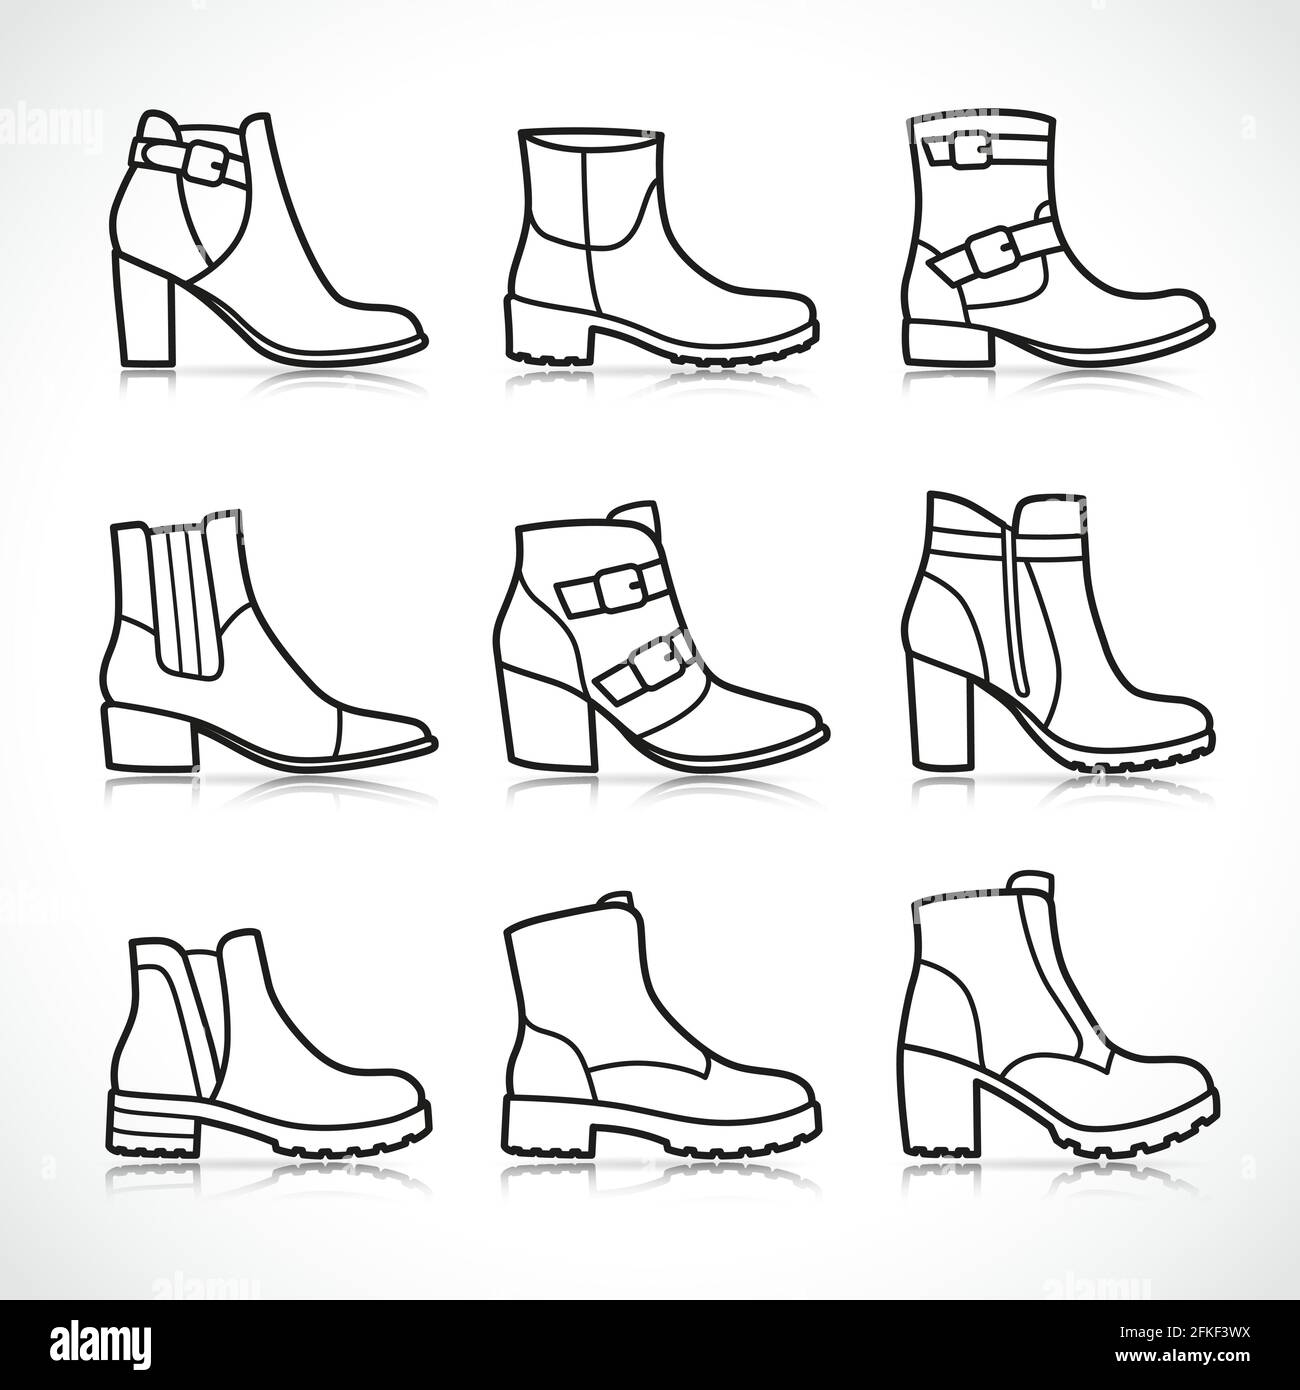 Vector illustration of isolated boots icons set Stock Vector